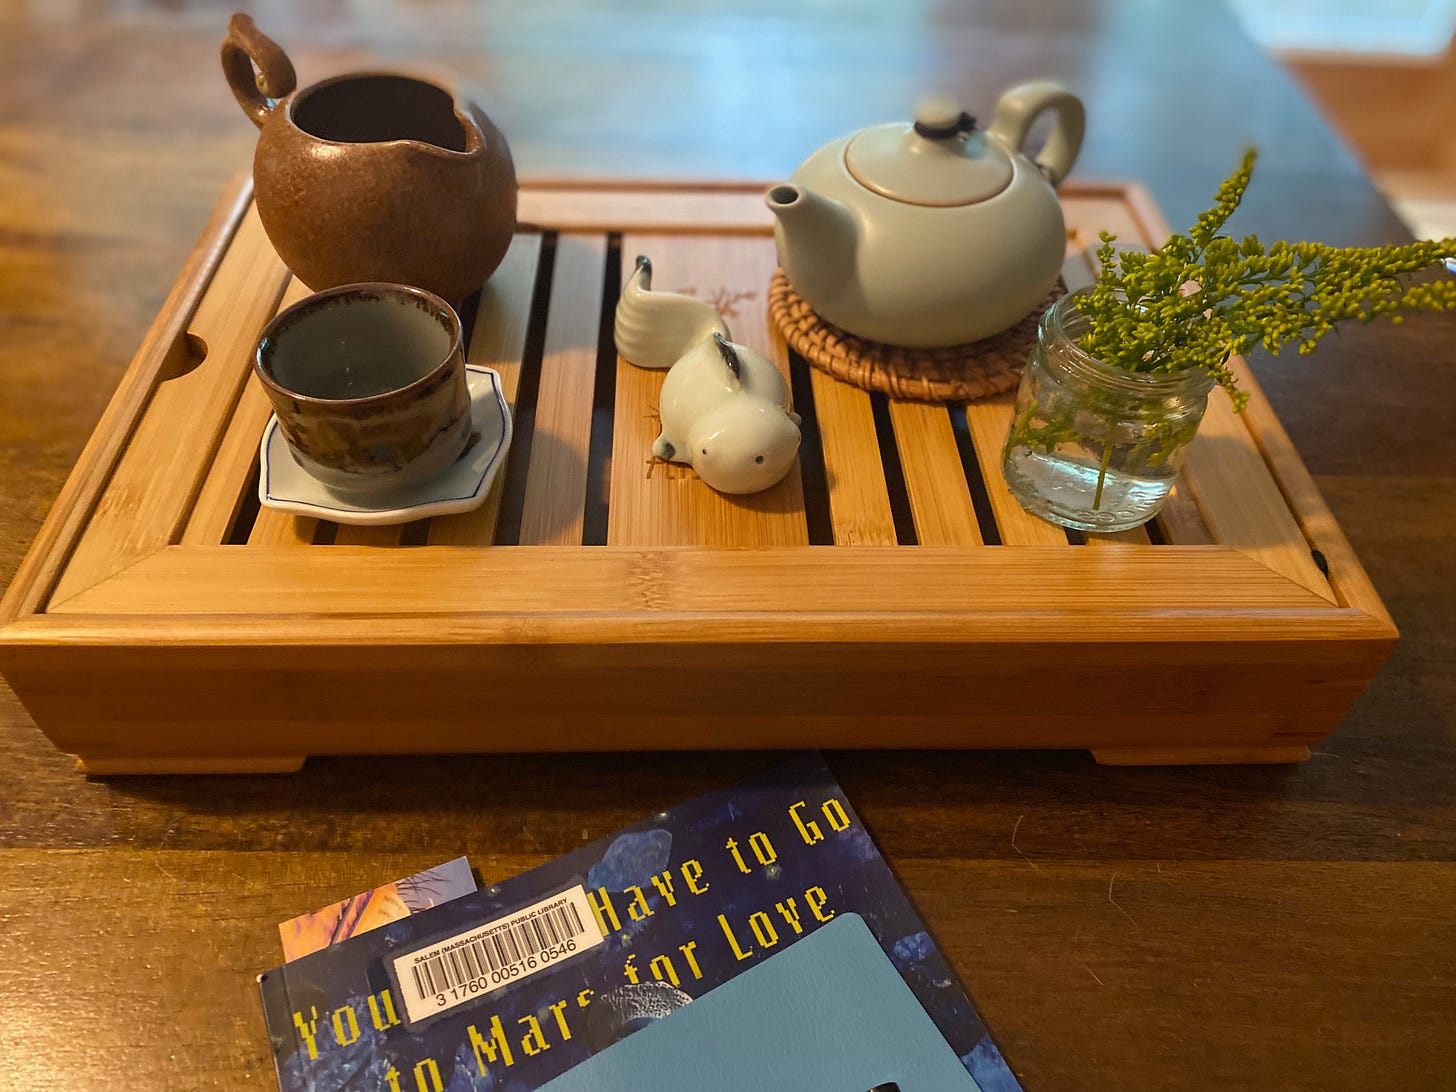 A small tea setup on a wooden bamboo tray with open slats. There’s a small ceramic tea cup, a brown ceramic pitcher, a small pale green ceramic teapot, a goldfish tea friend, and a small glass jar of goldenrod. You Don’t Have to Go to Mars for Love, a pale blue notebook, and a pen sit on the table in front of the tea.